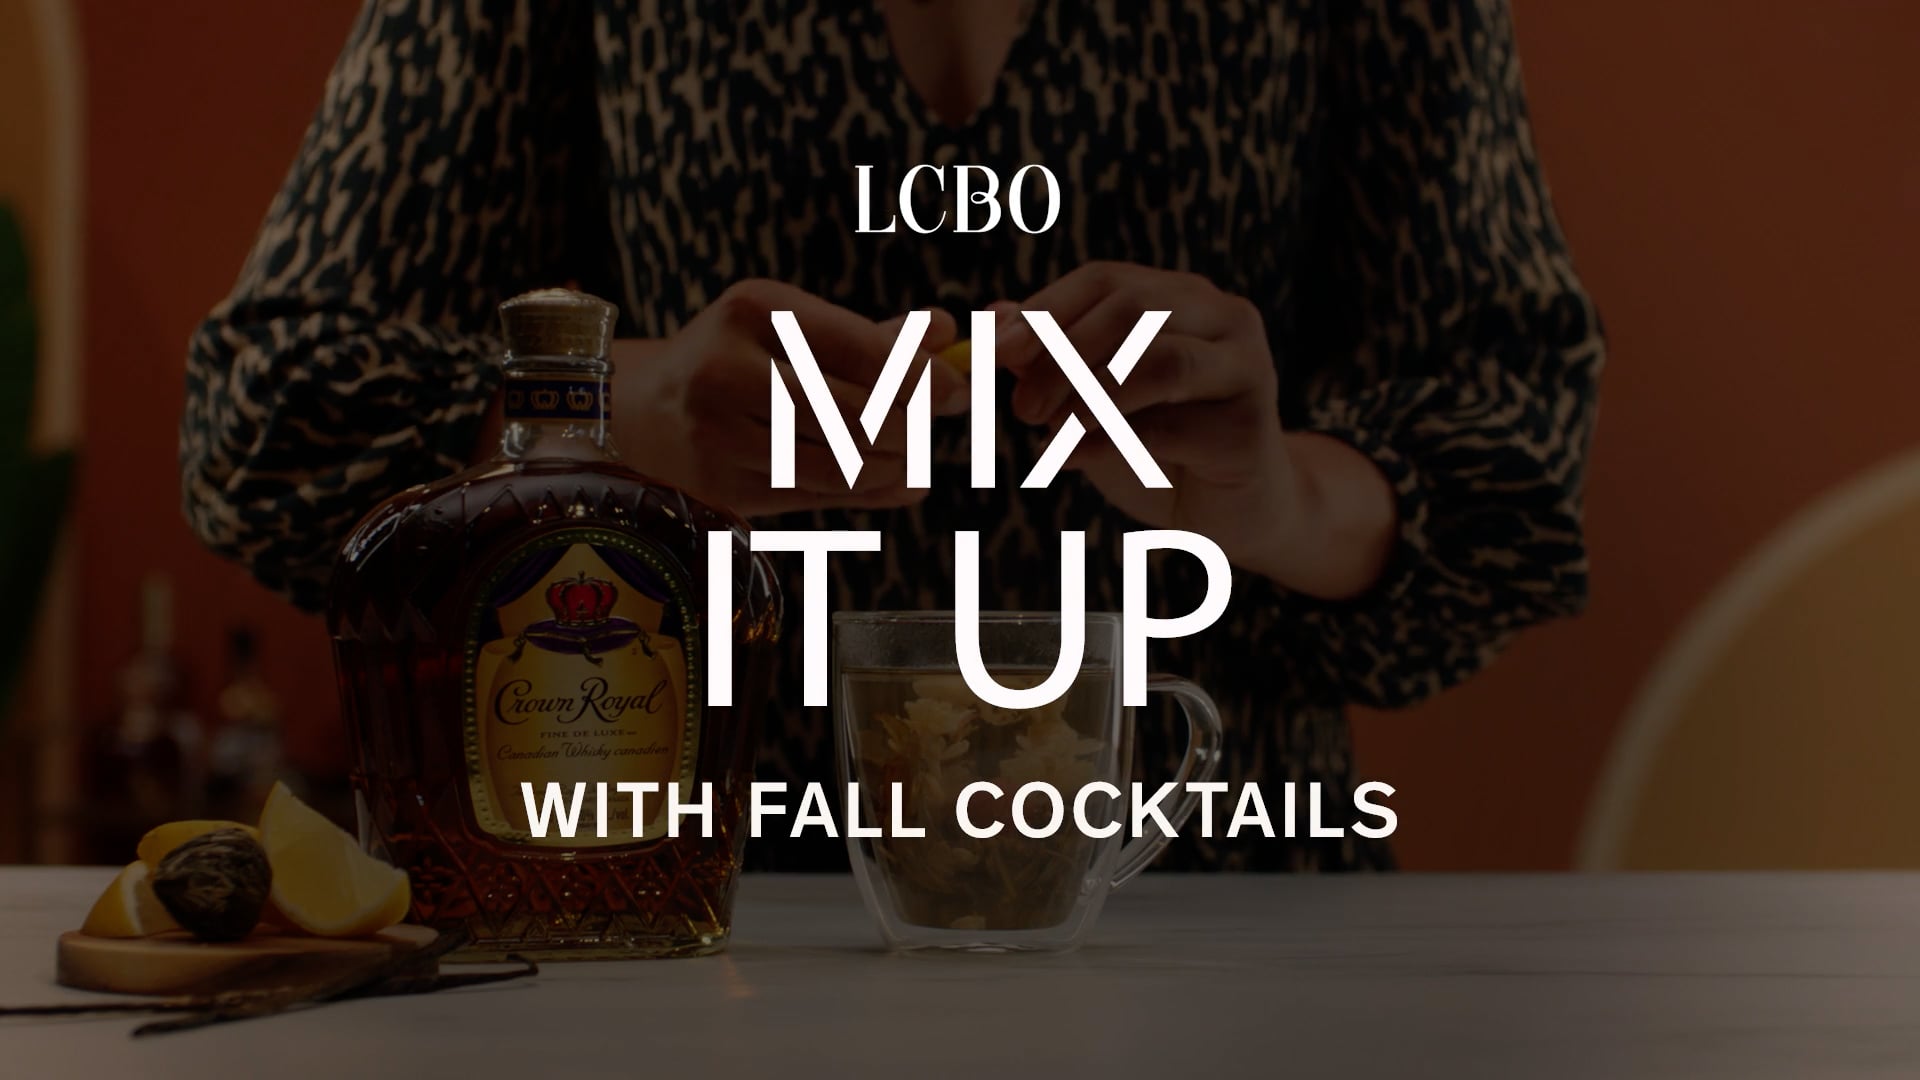 LCBO Mix It Up: Evelyn